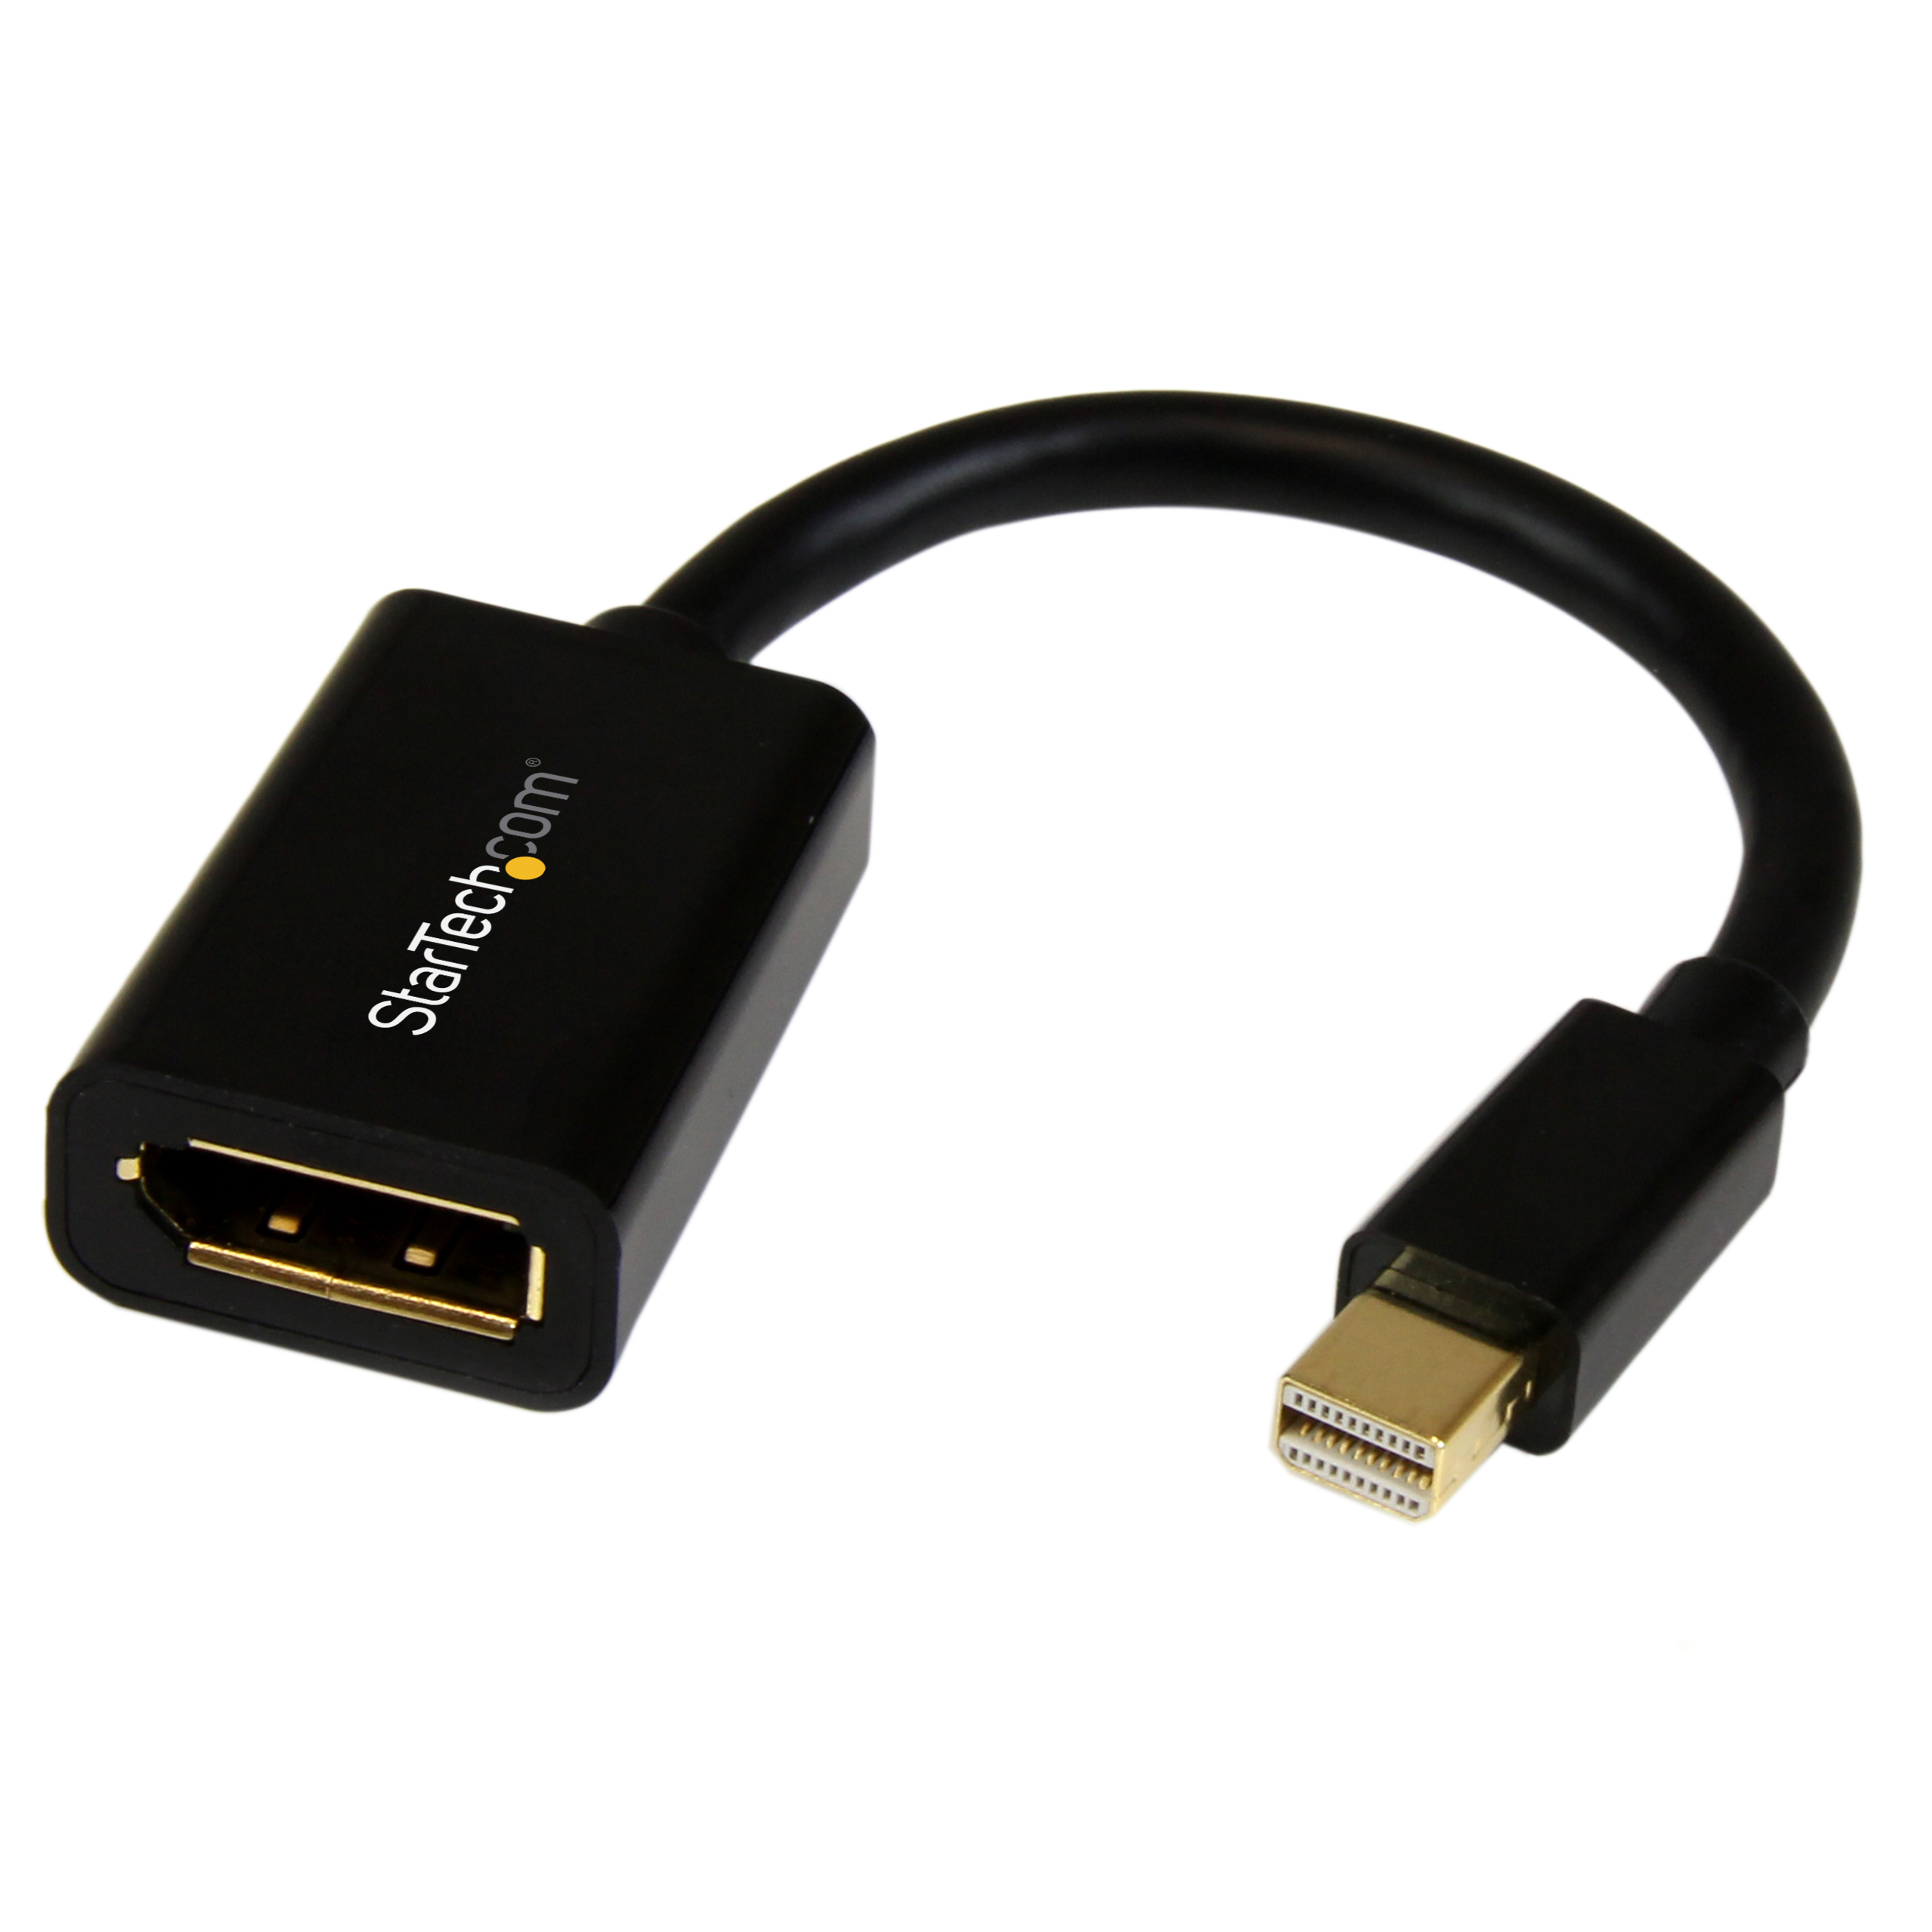 StarTech.com 6in Mini DisplayPort to DisplayPort Video Cable Adapter (MDP2DPMF6IN)